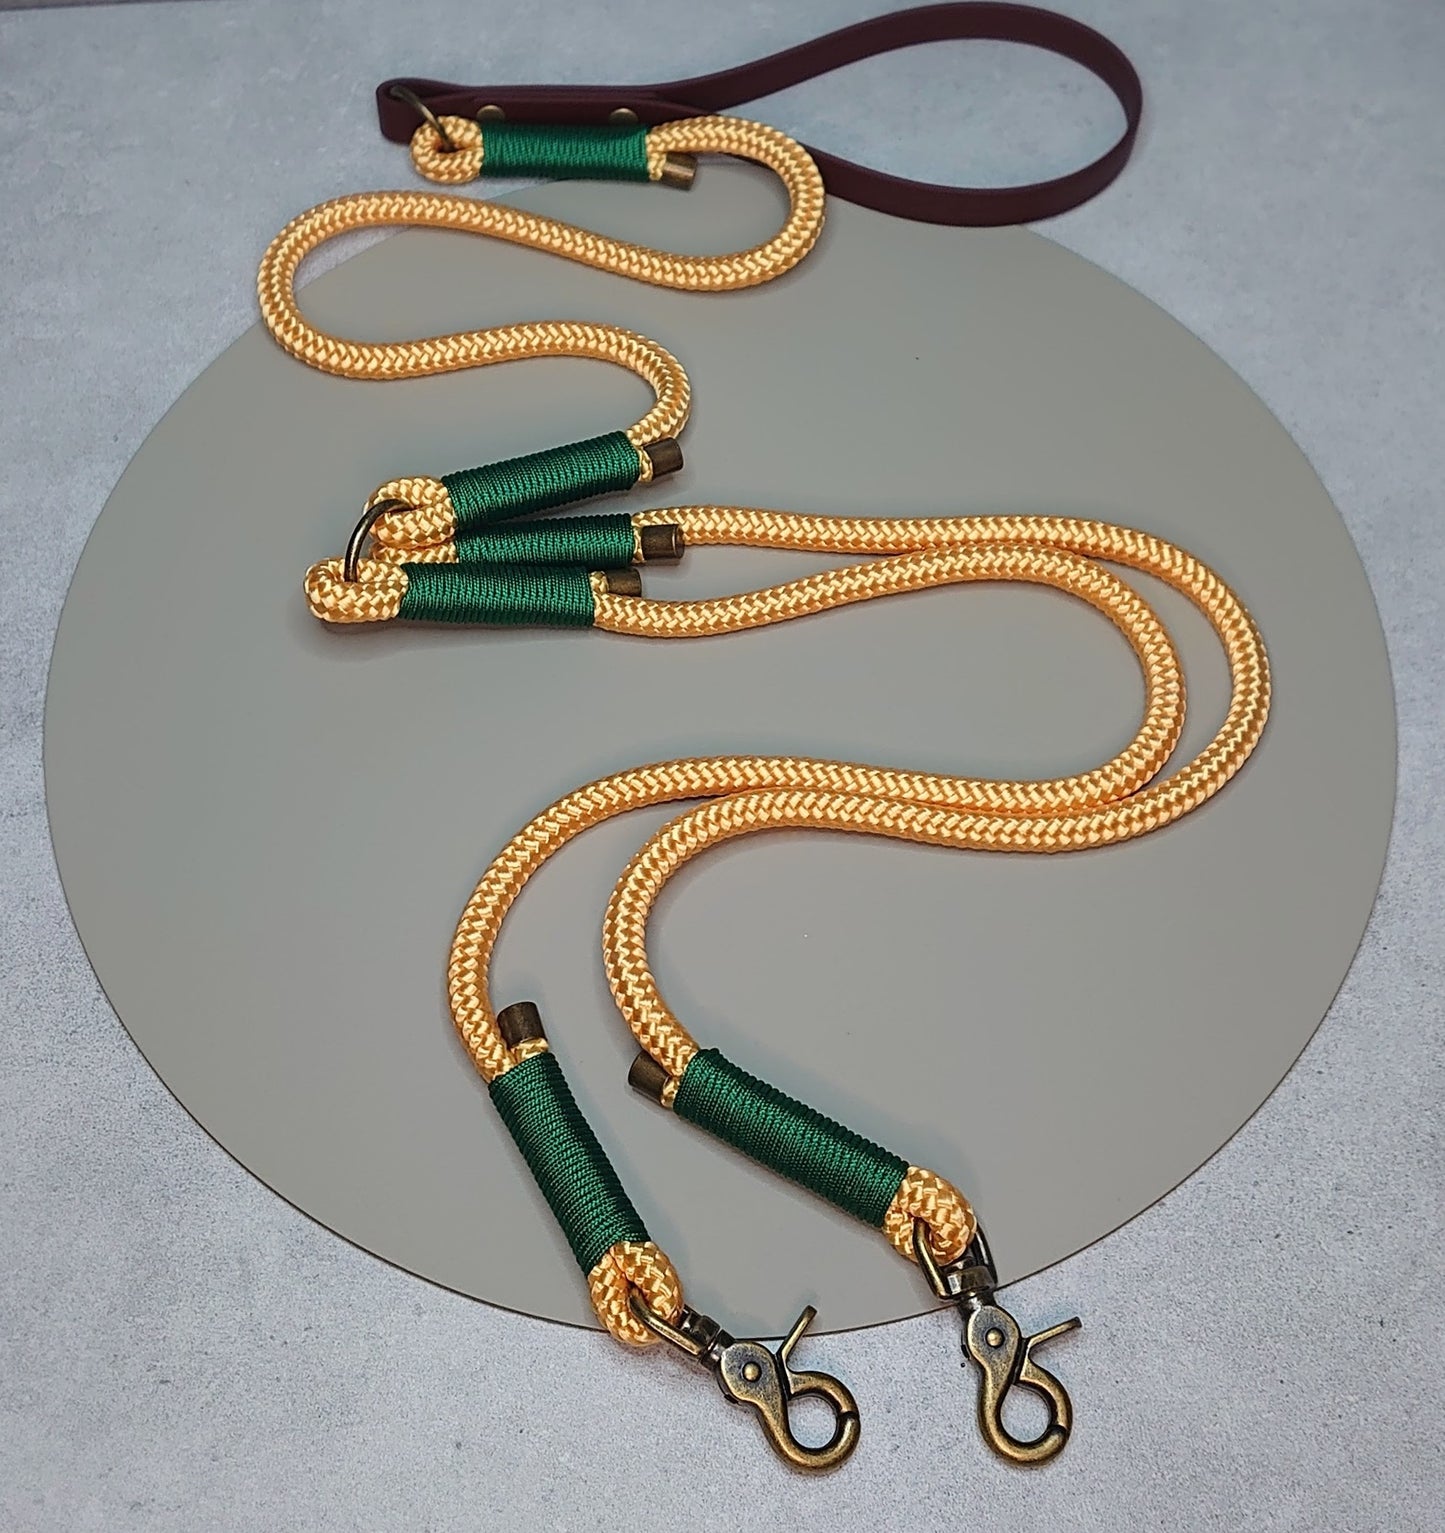 Split rope lead with biothane handle - Design your own